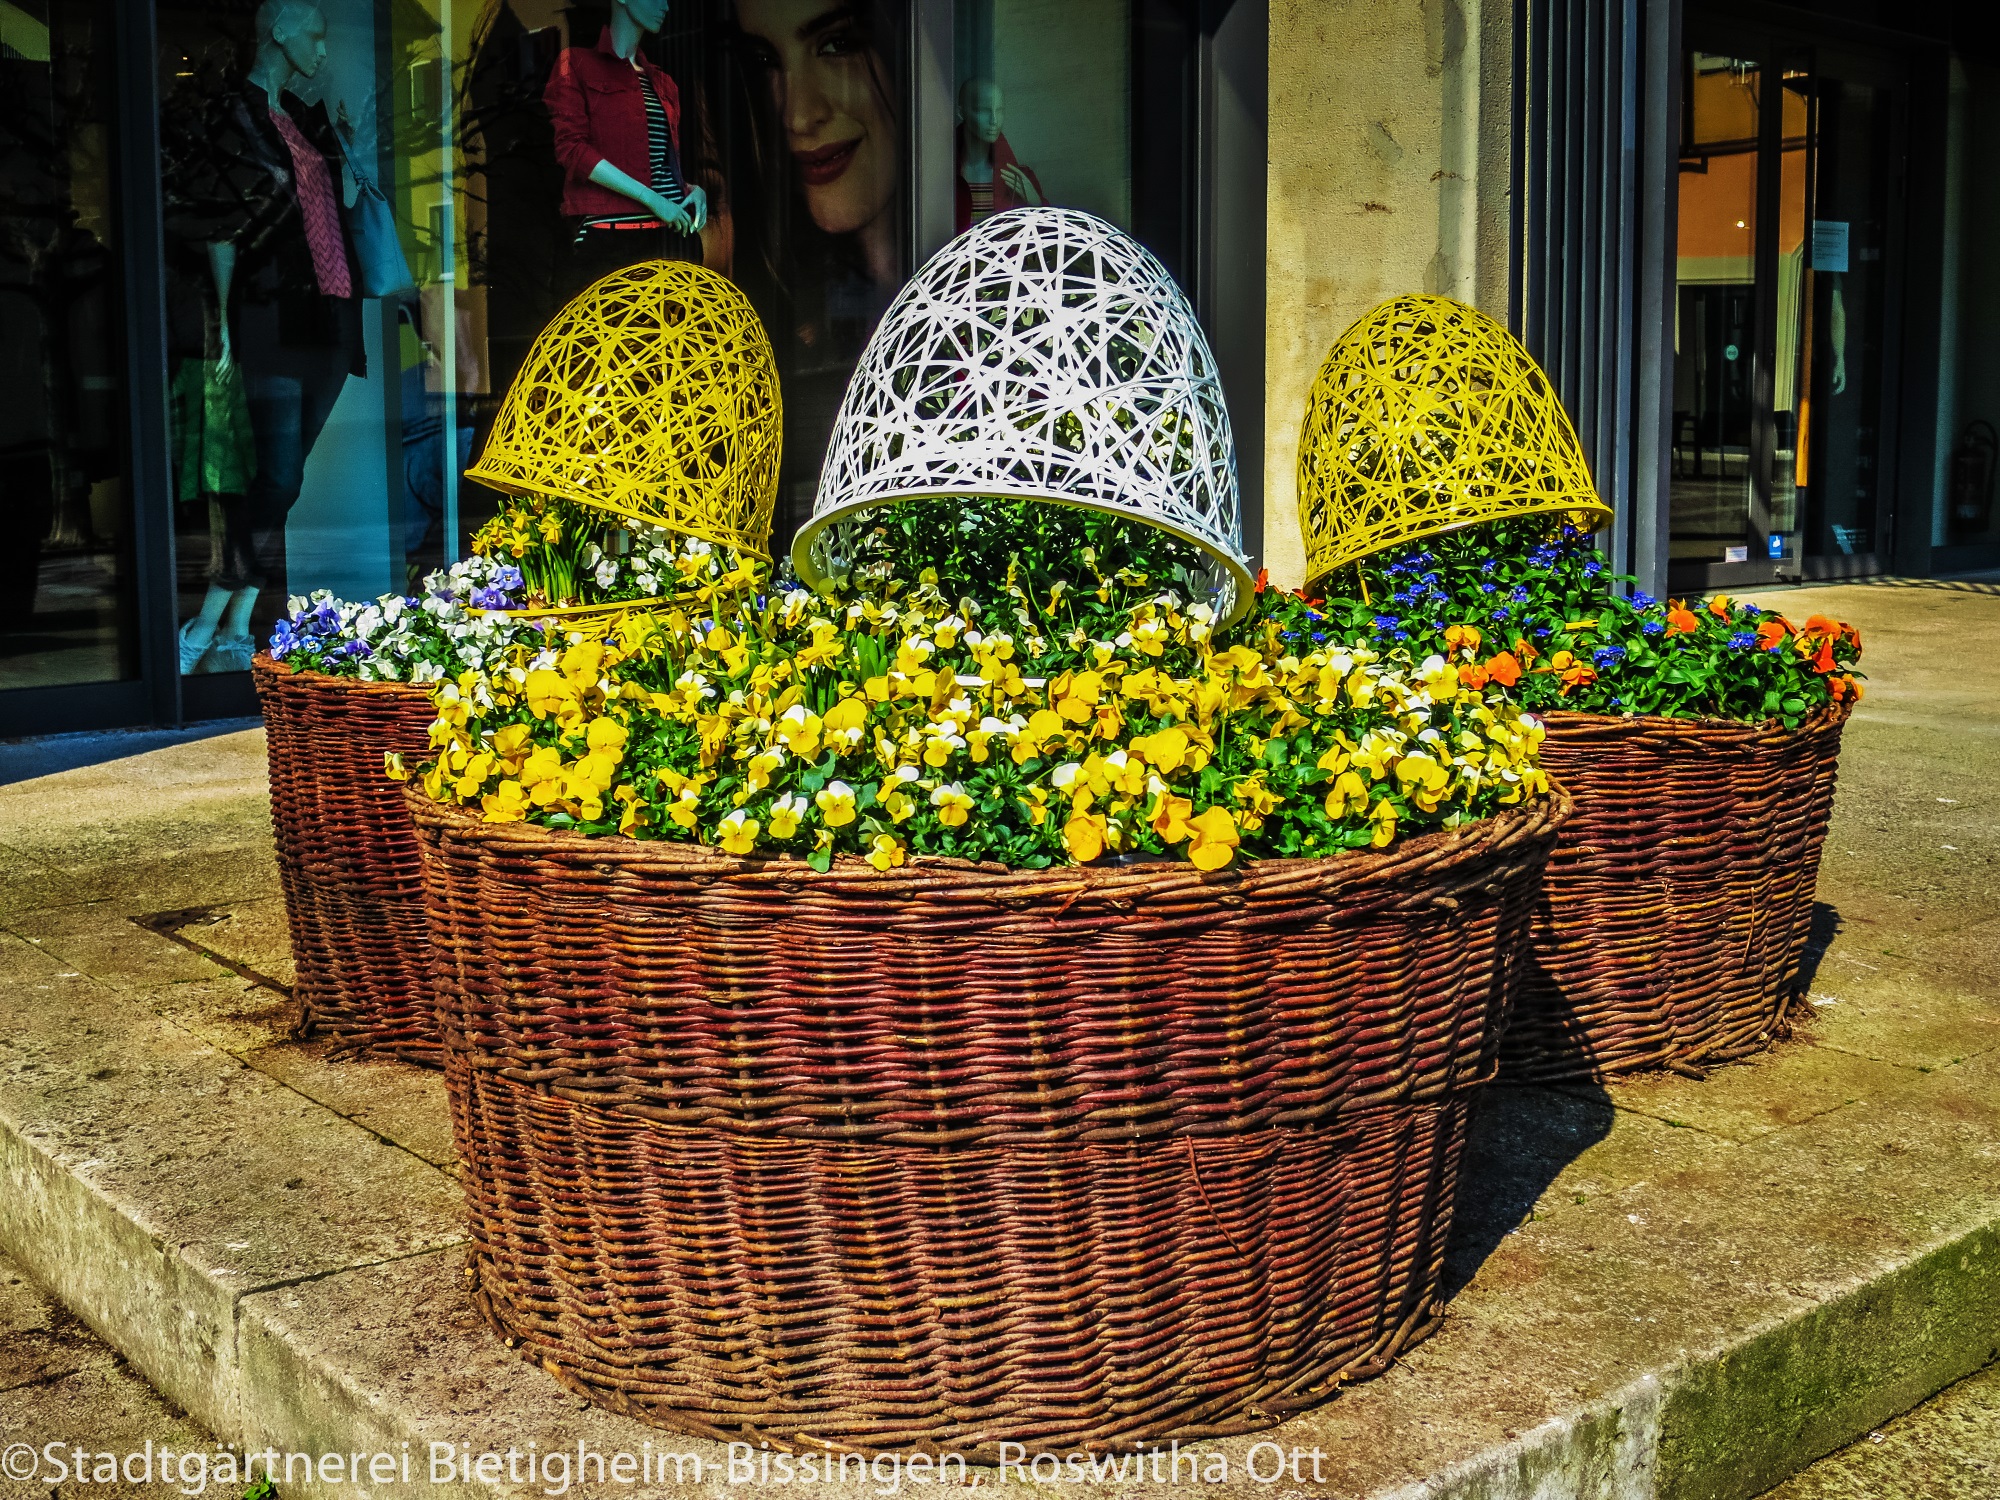 decorative-eggs-in-a-basket-with-flowers